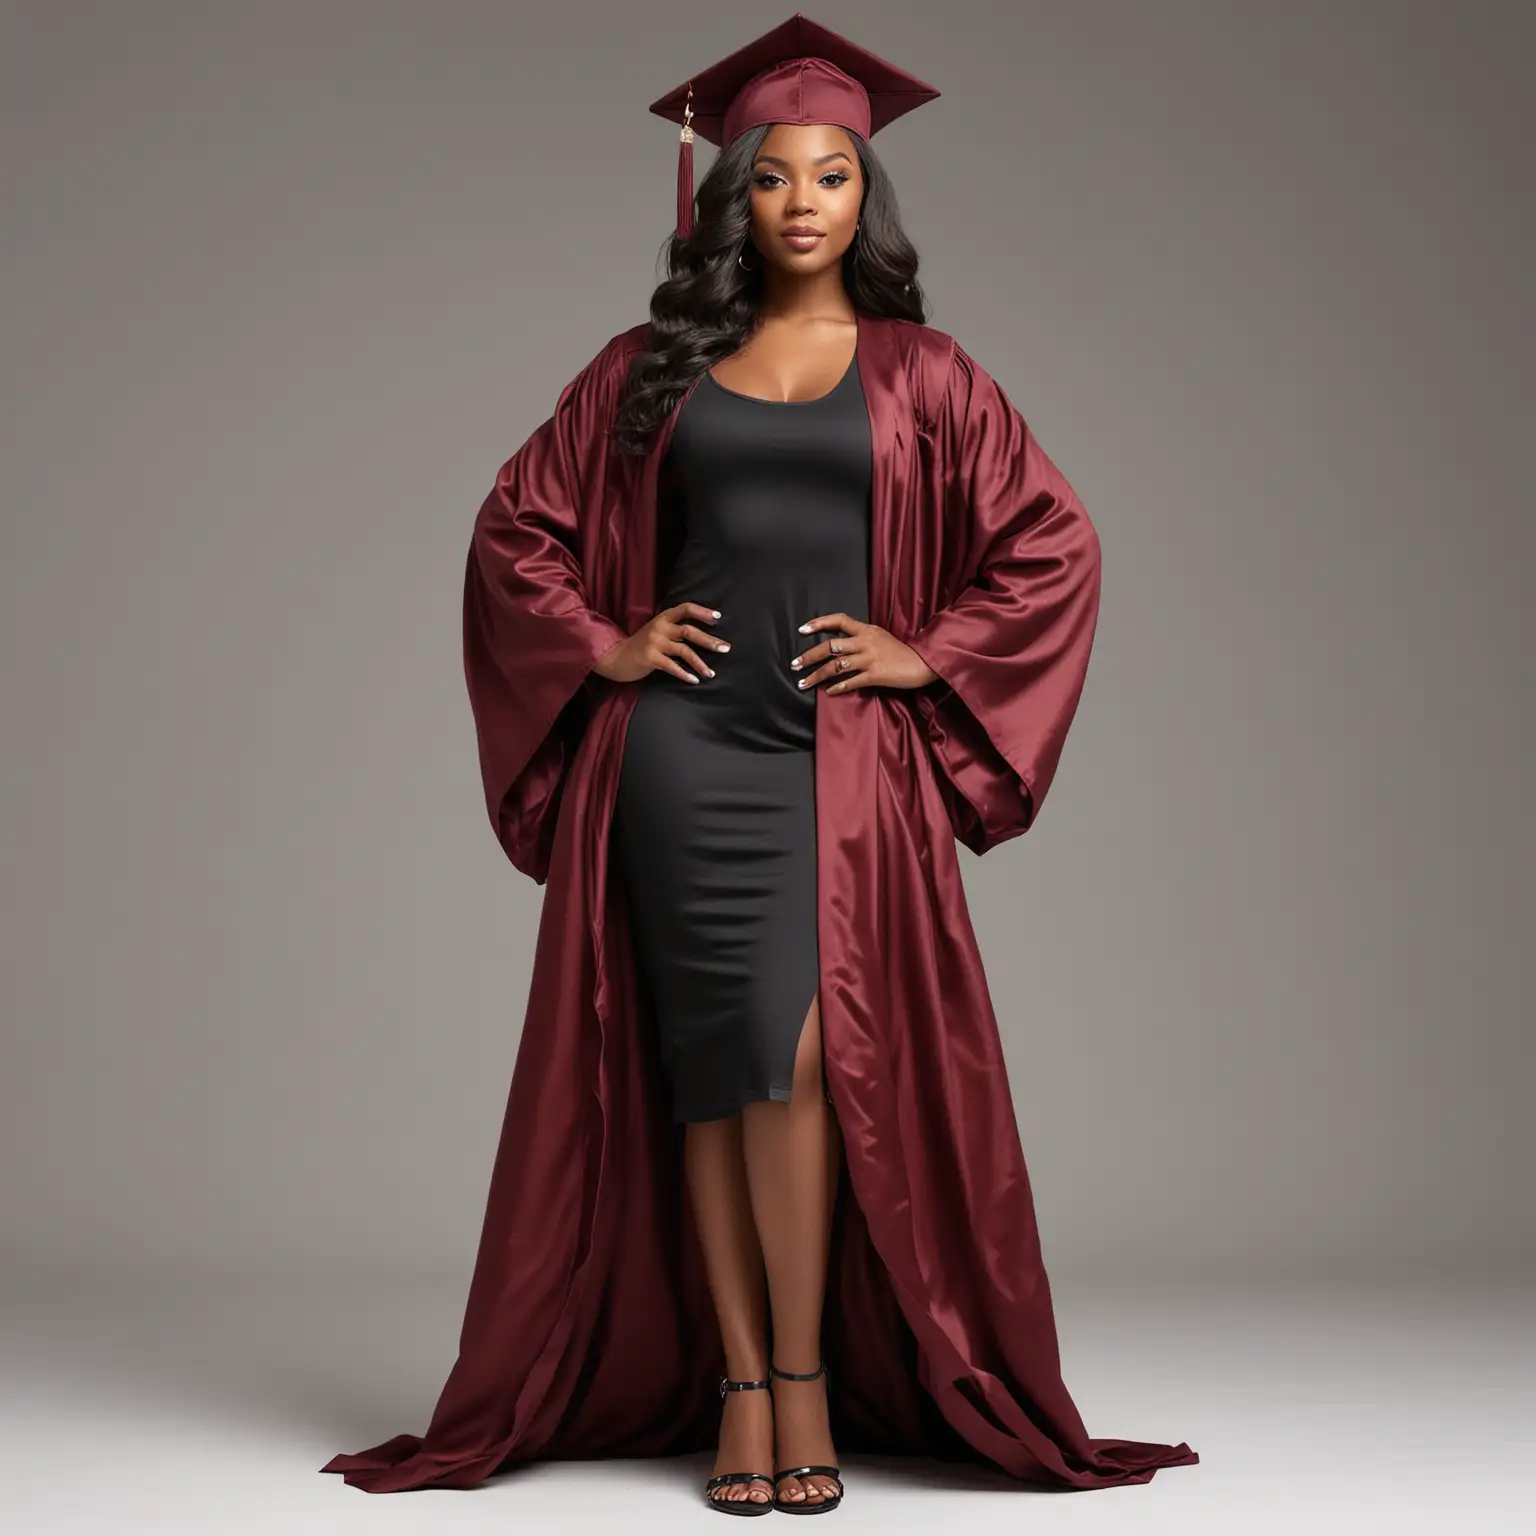 Elegant Black Female Graduate in Maroon Cap and Gown with Glamorous Makeup